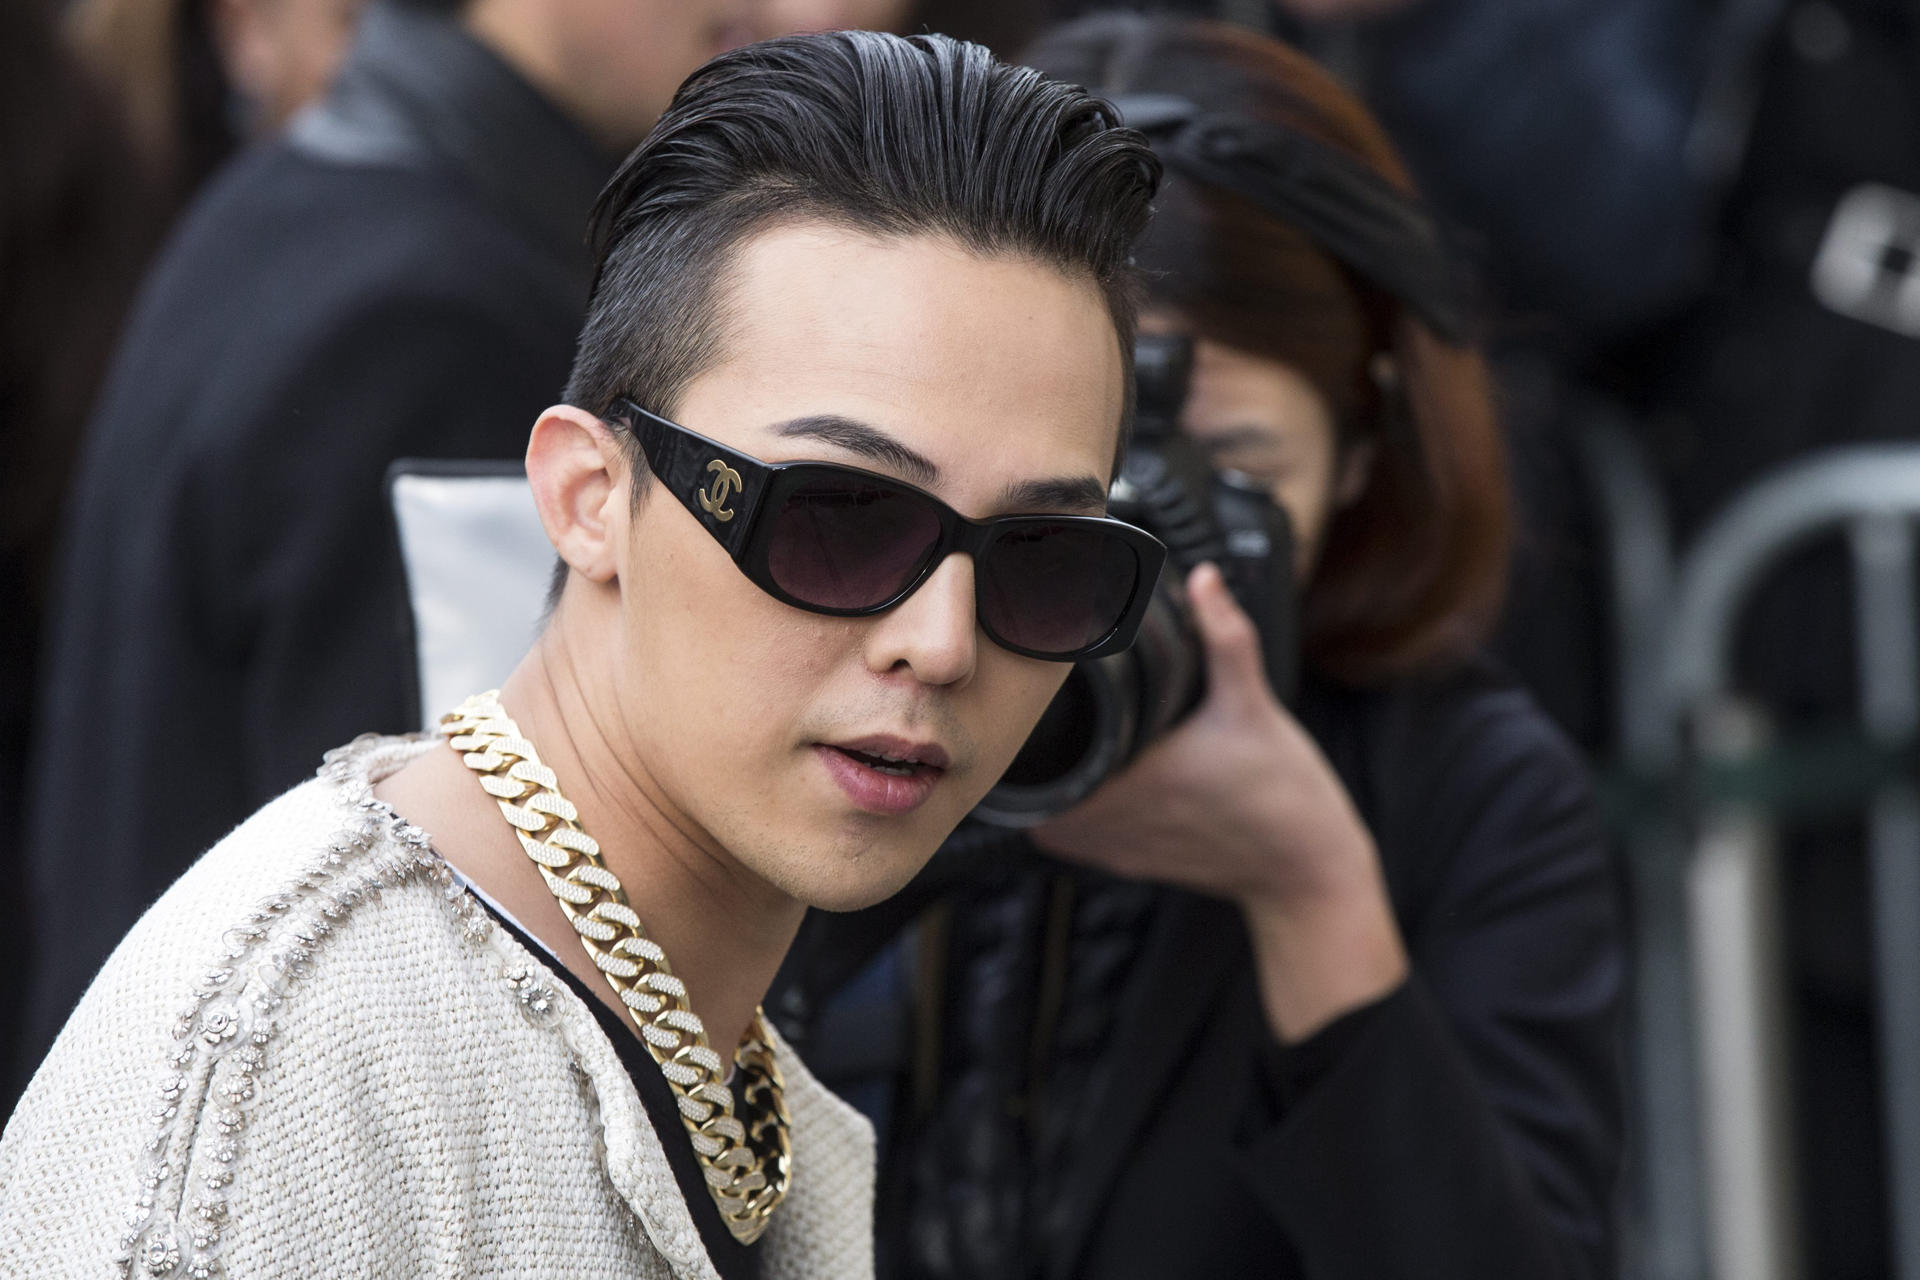 G-Dragon to testify before police over alleged drug use - EFE Noticias